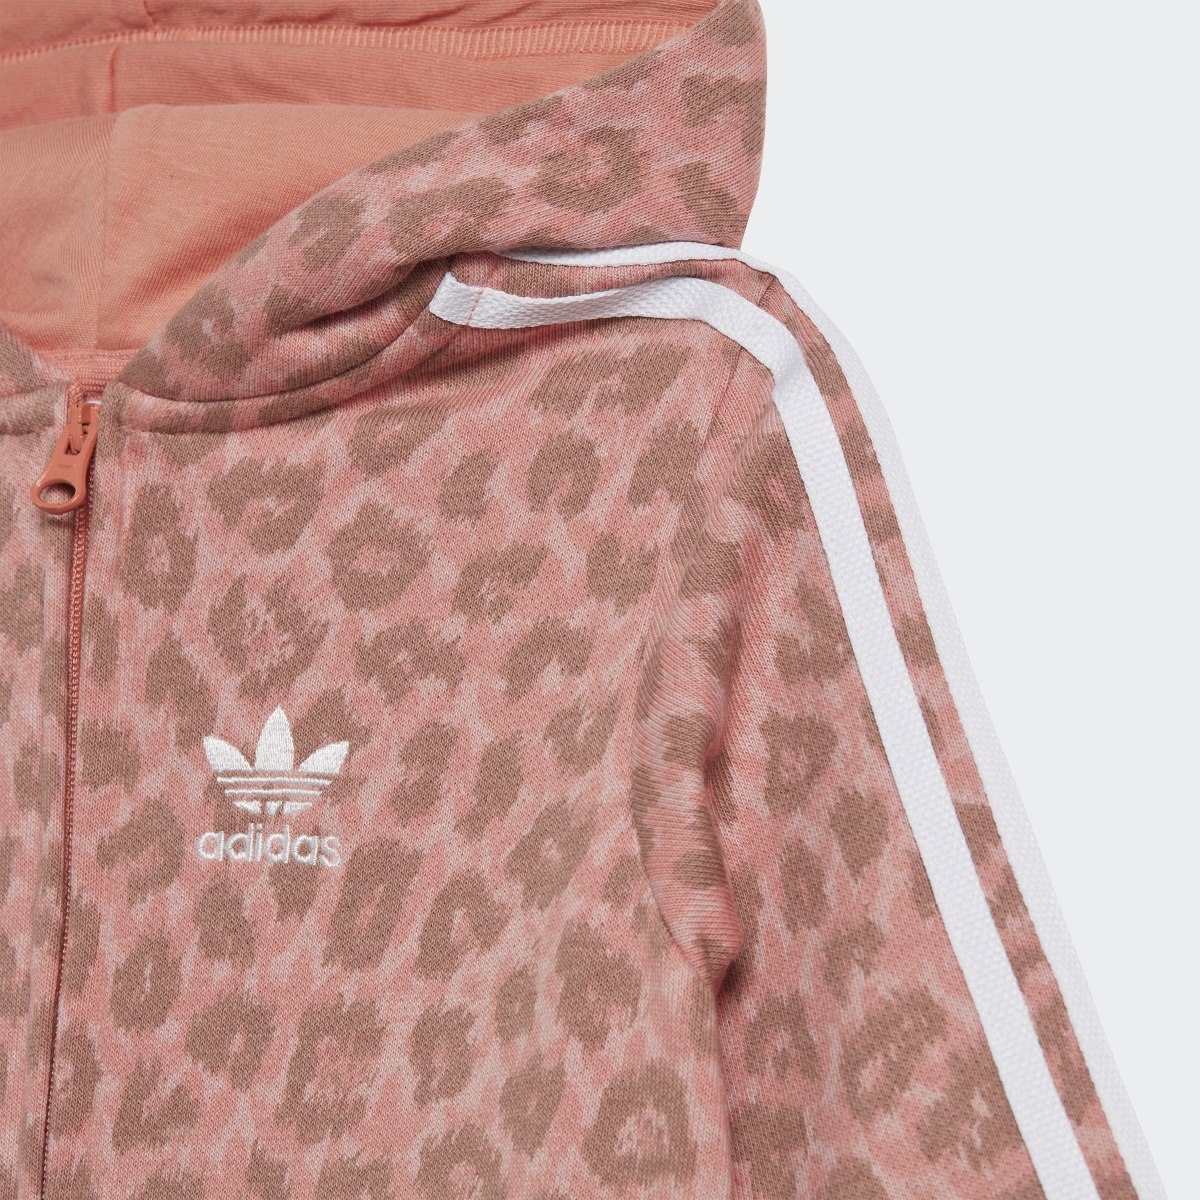 Adidas Body Animal Allover Print Hooded with Ears. 4